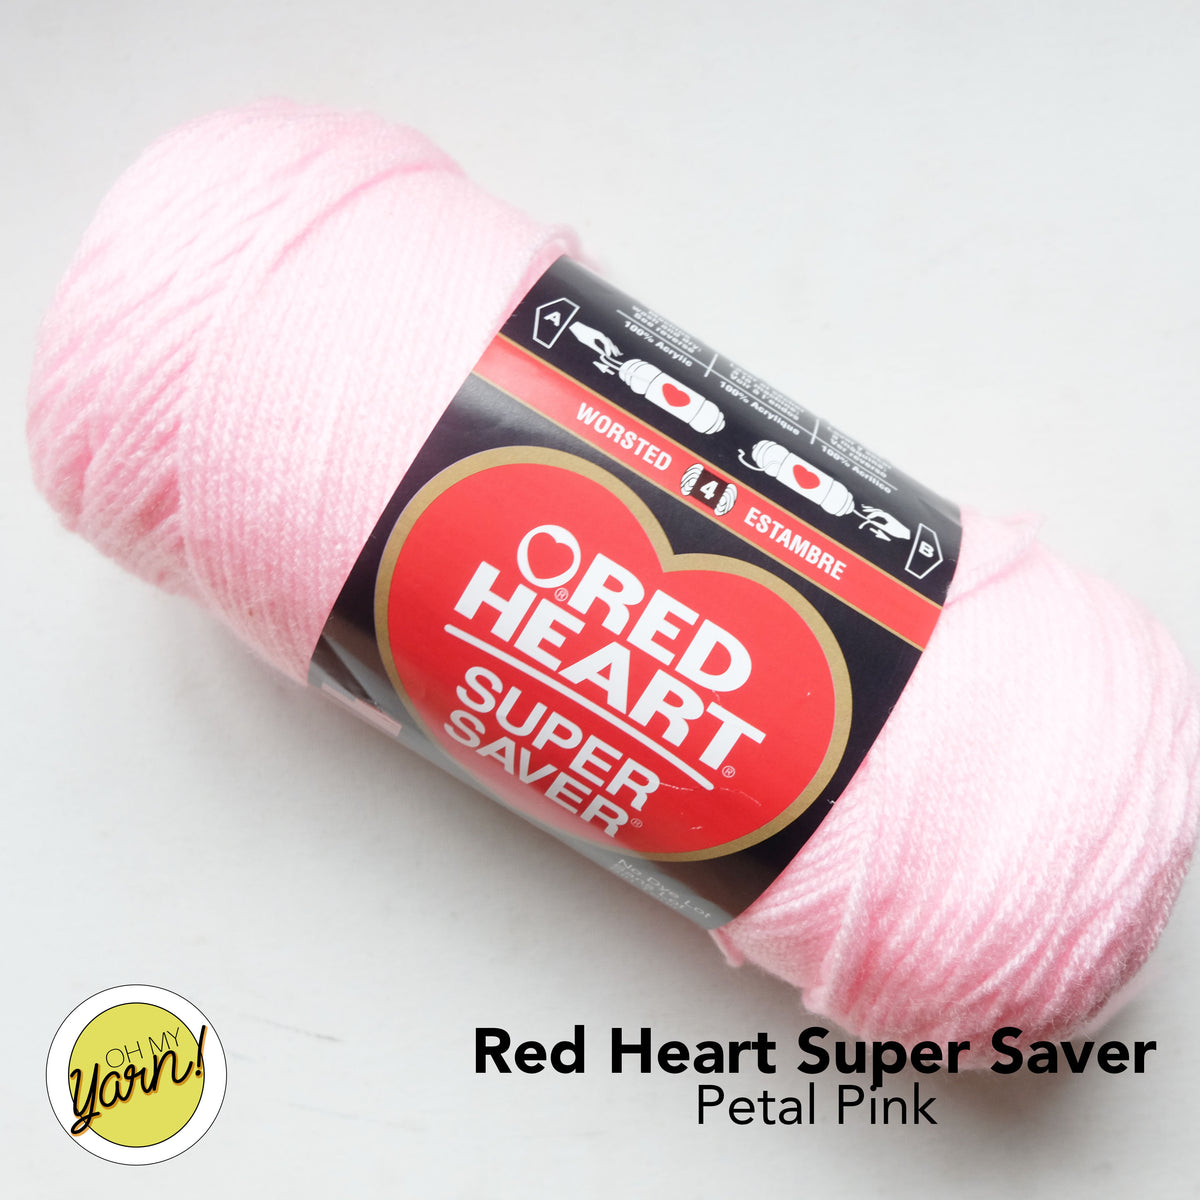 Red Heart Super Saver Worsted Acrylic Yarn